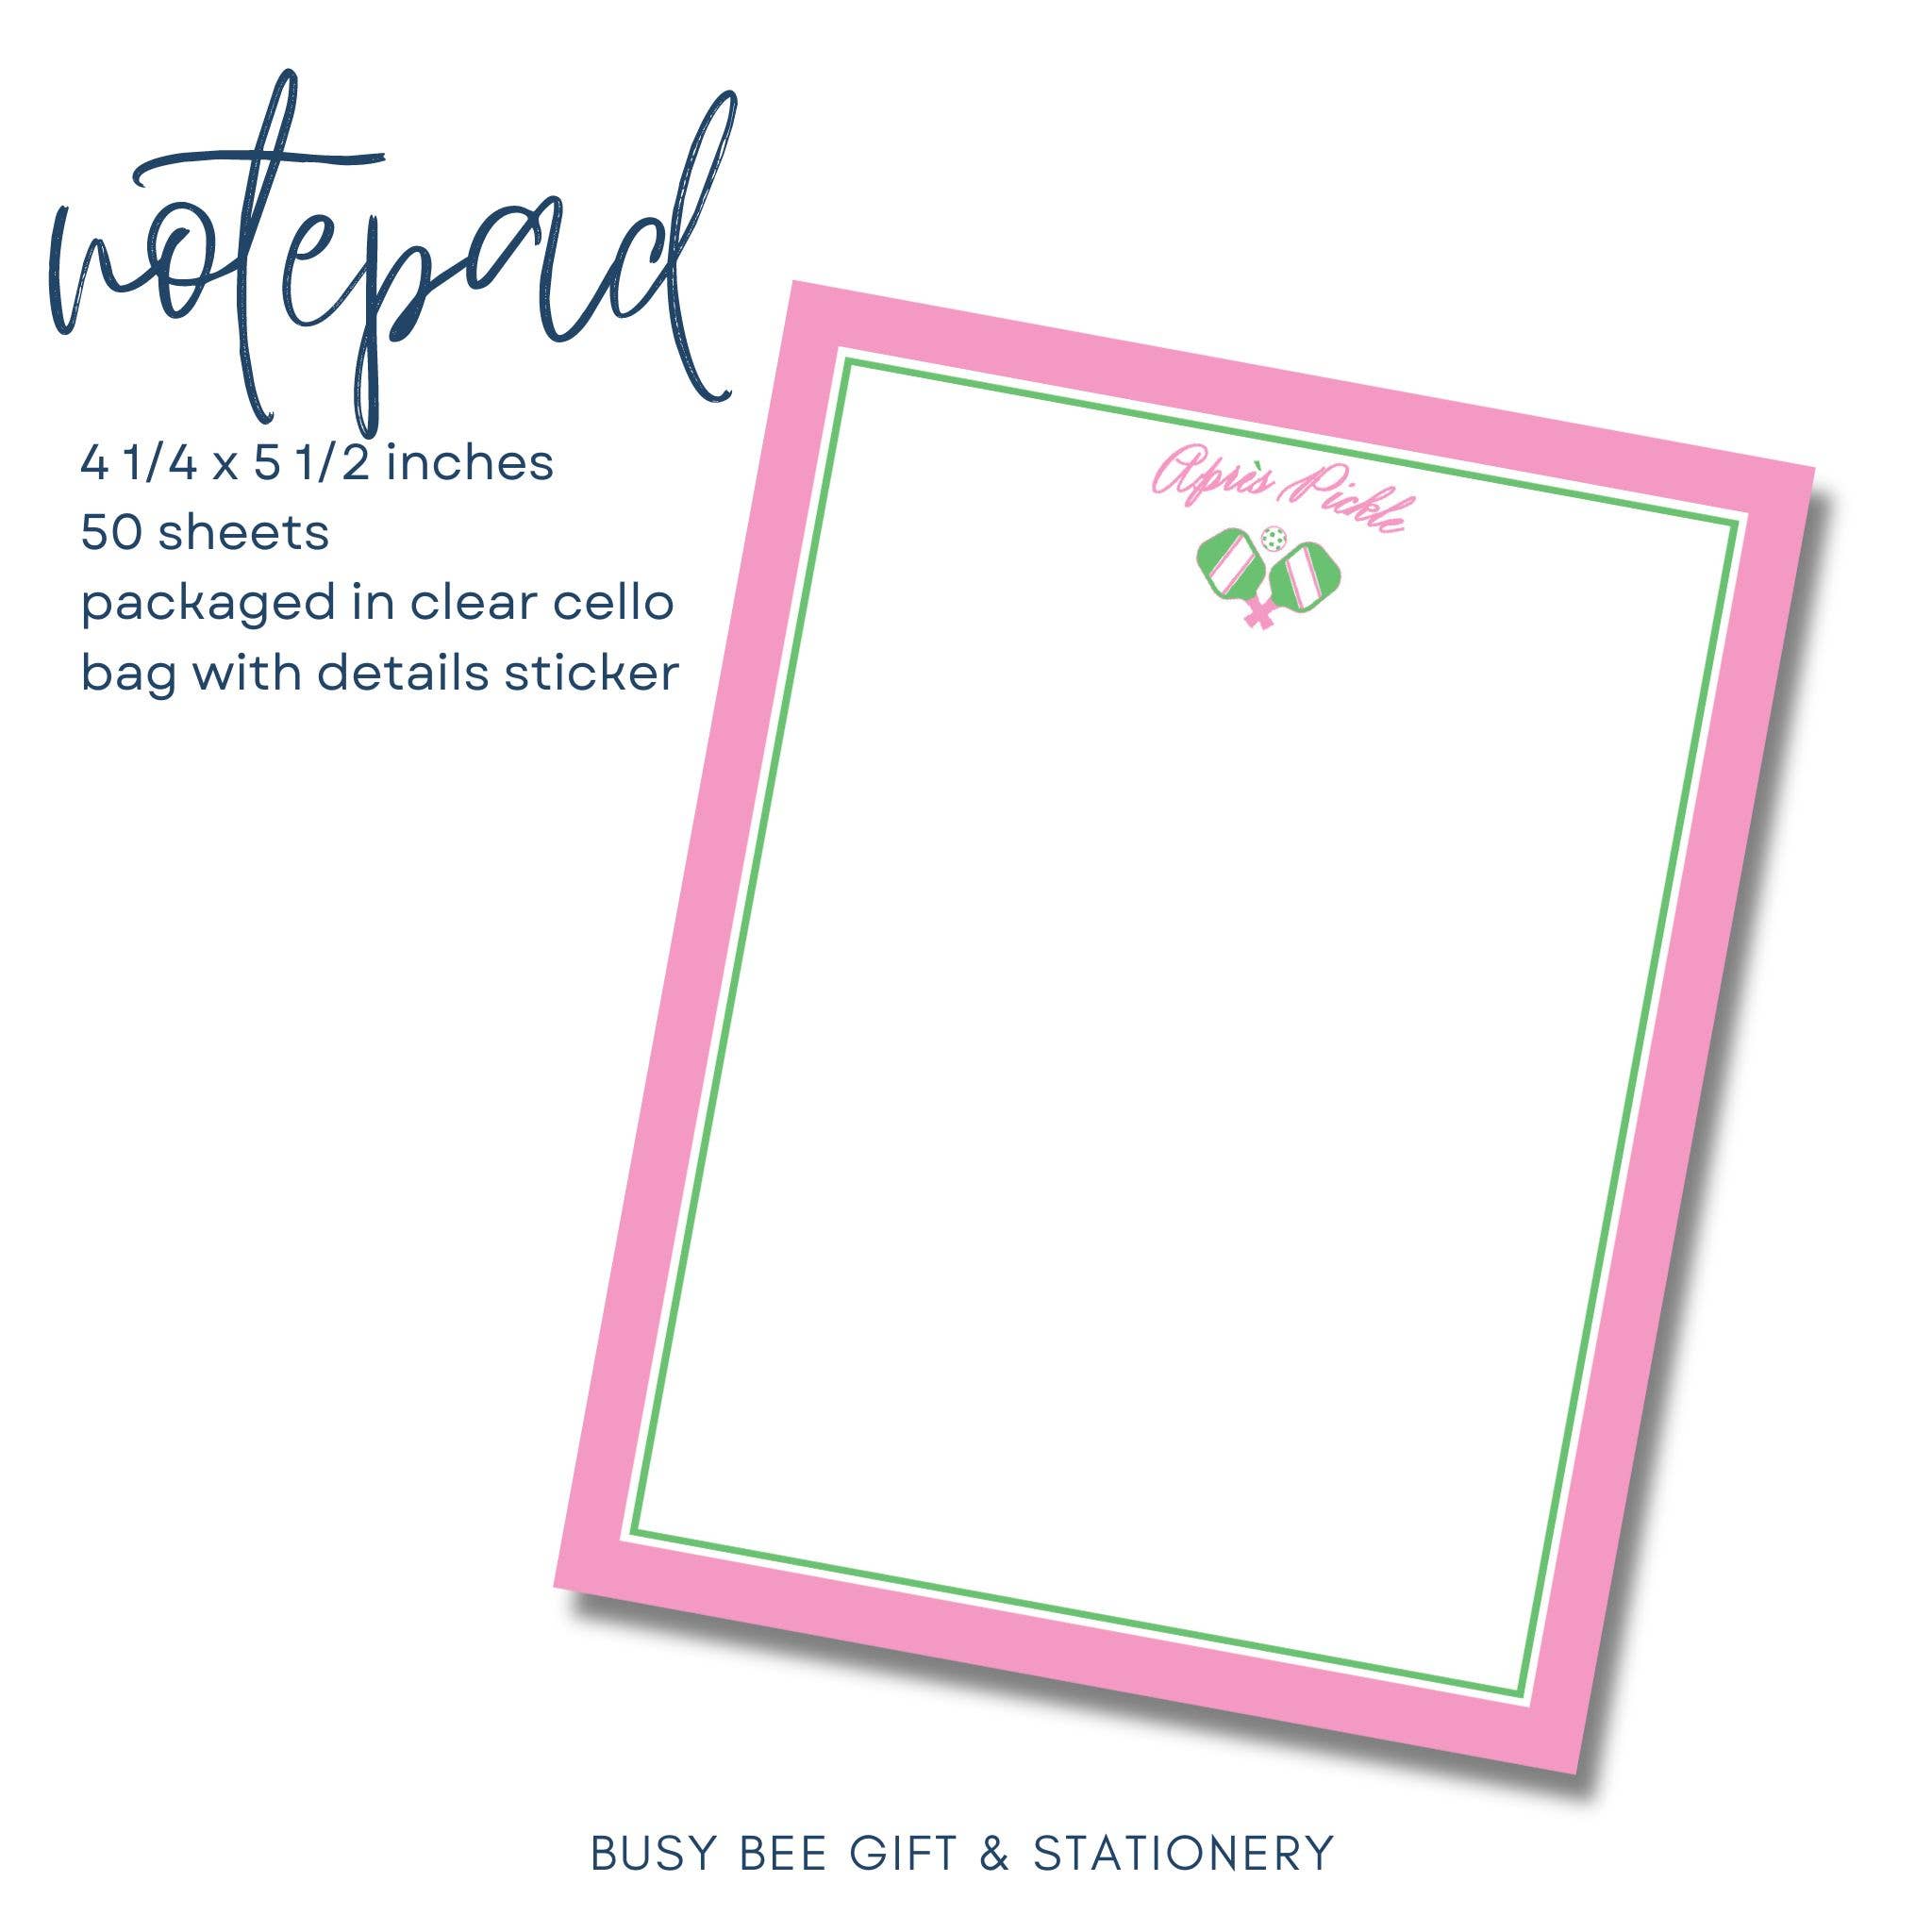 Busy Bee Gift & Stationery - Pickle Ball Notepad 4.25x5.5 inches